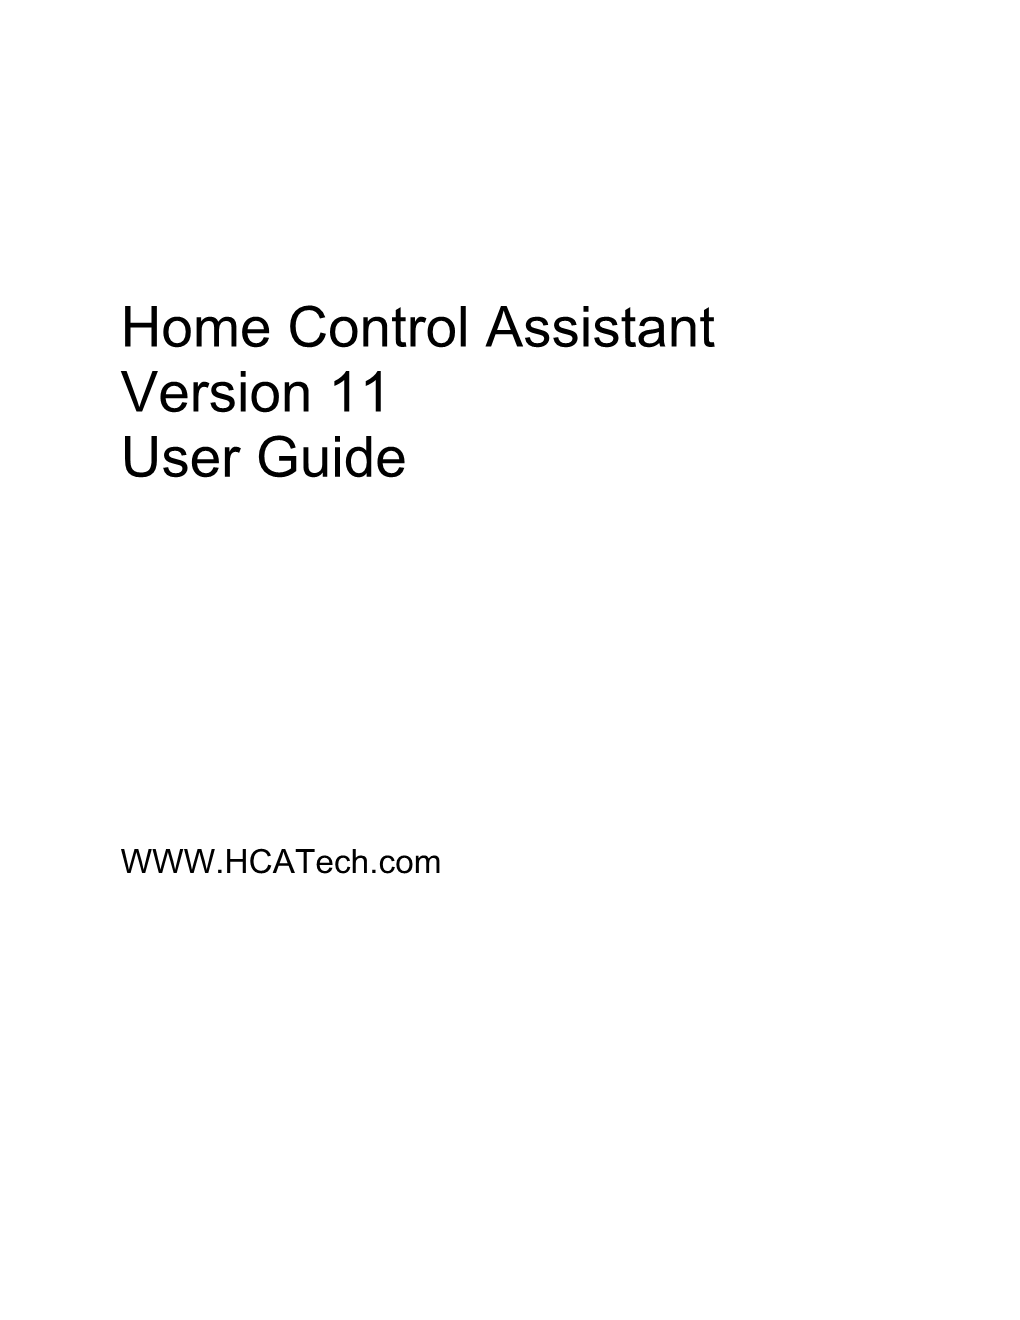 Home Control Assistant Version 11 User Guide